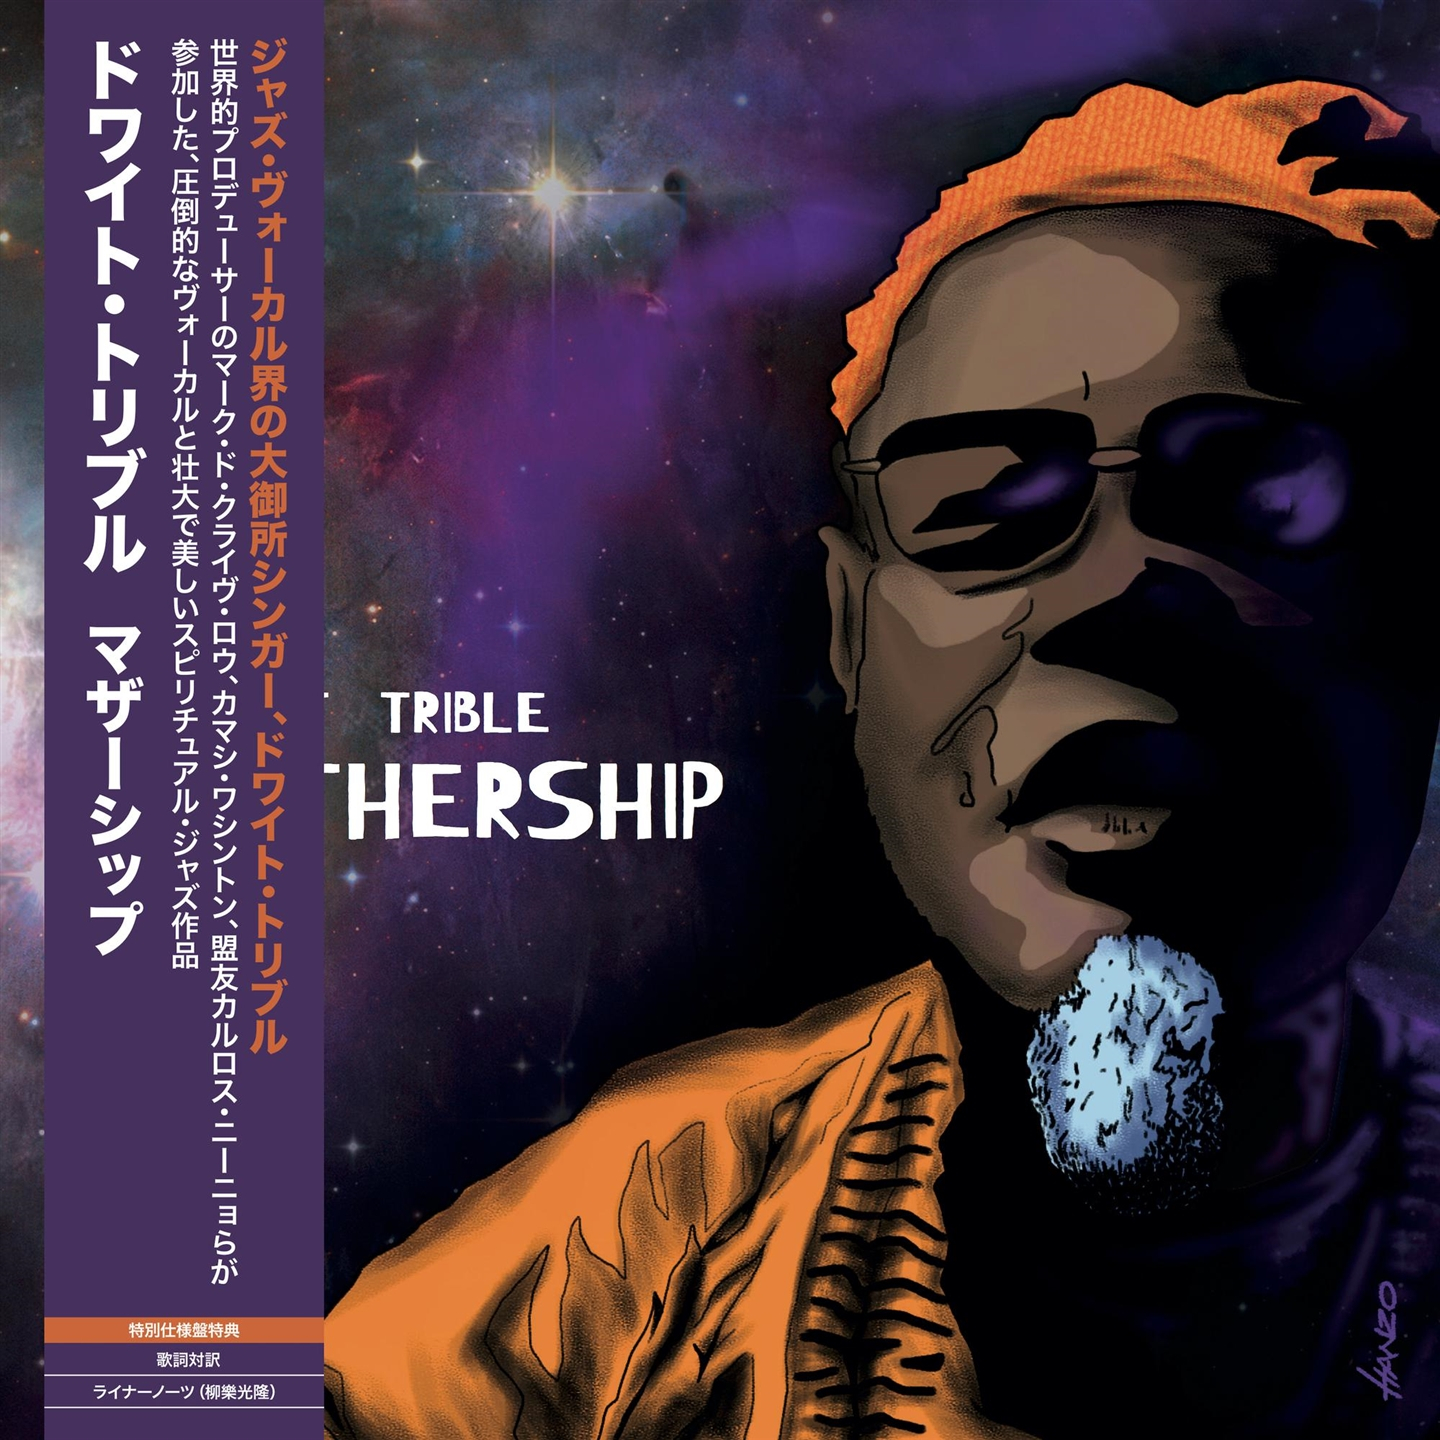 MOTHERSHIP (JAPANESE EDITION) [INDIE EXCL. CD]